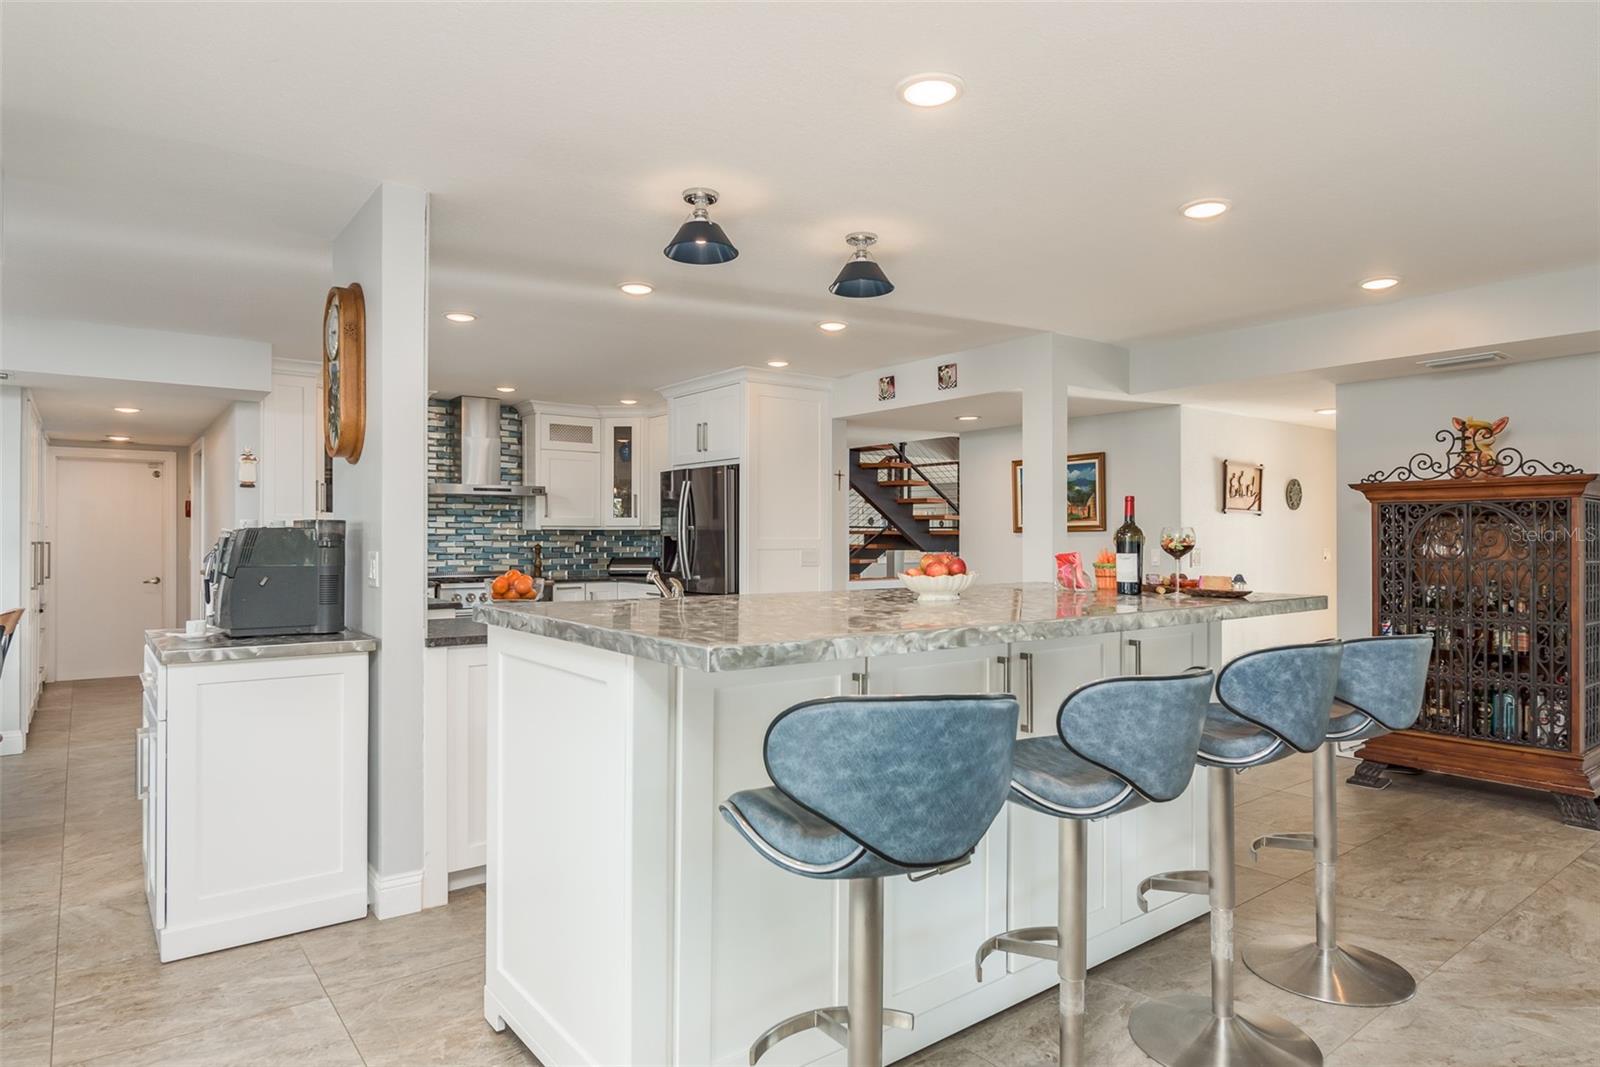 Kitchen features ample storage and is open to family room